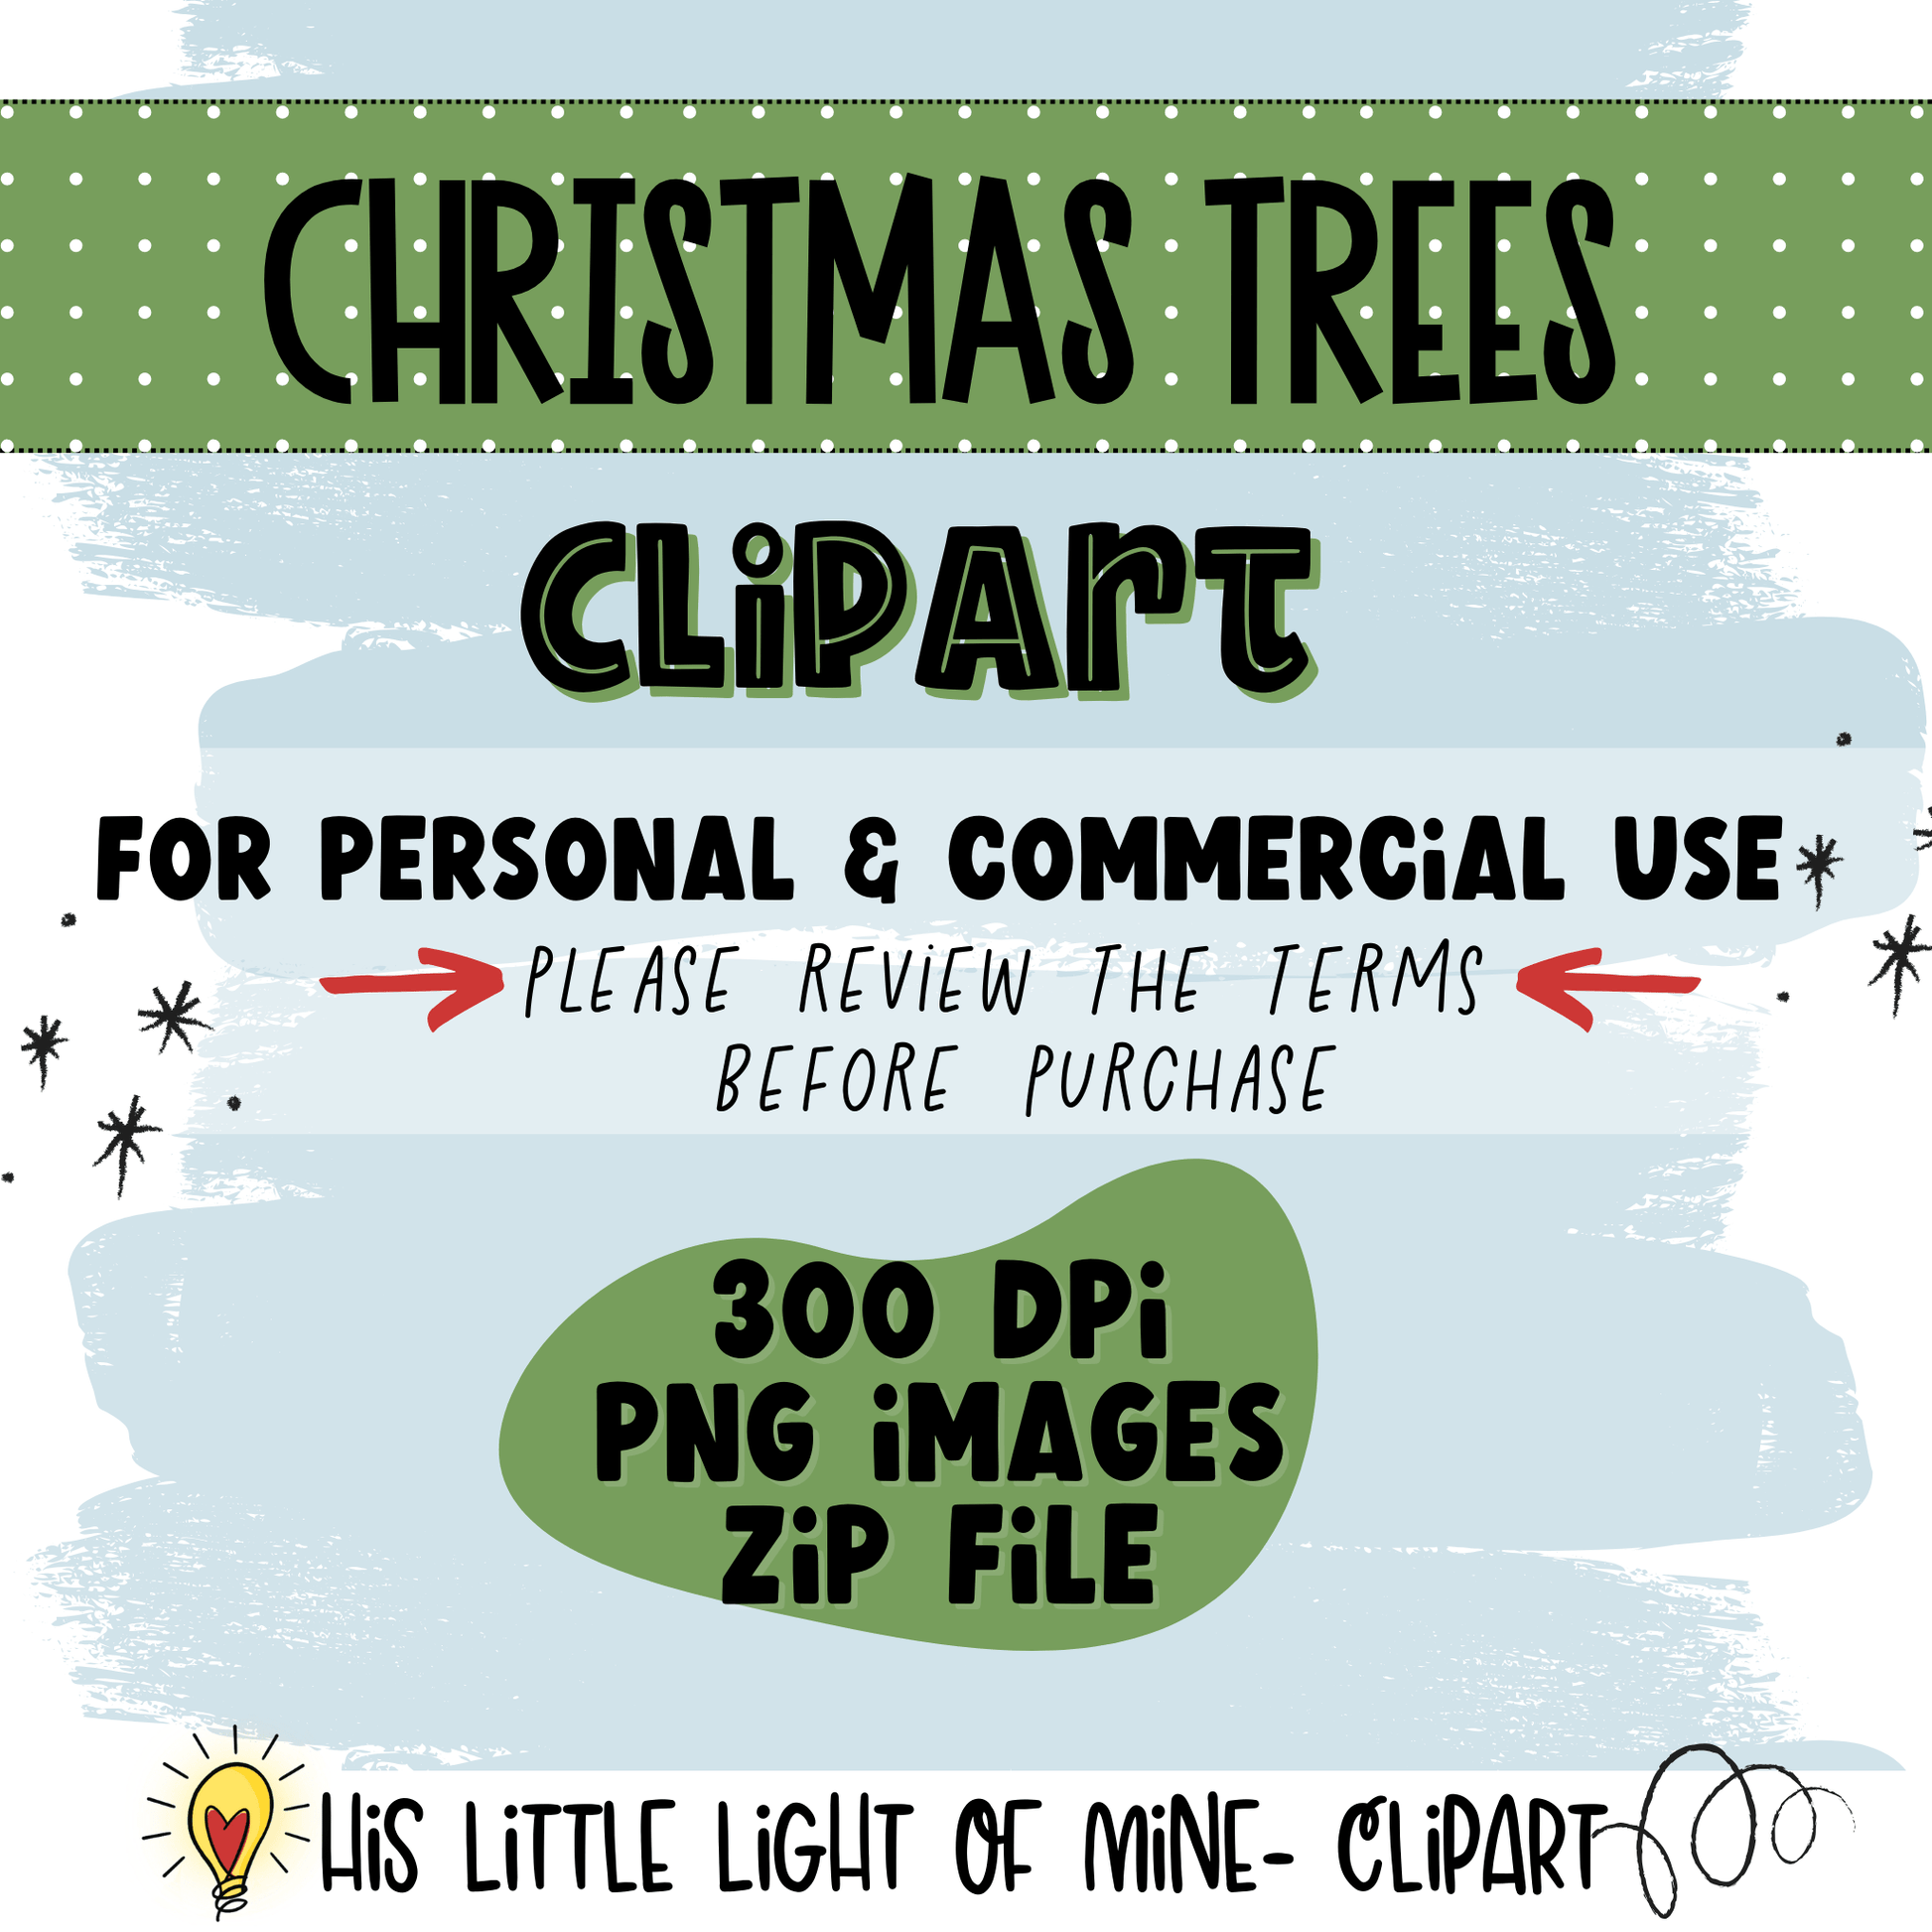 Happy Christmas Trees clip art pack features both personal and commercial use (with terms) and the types and sizes of the files. 